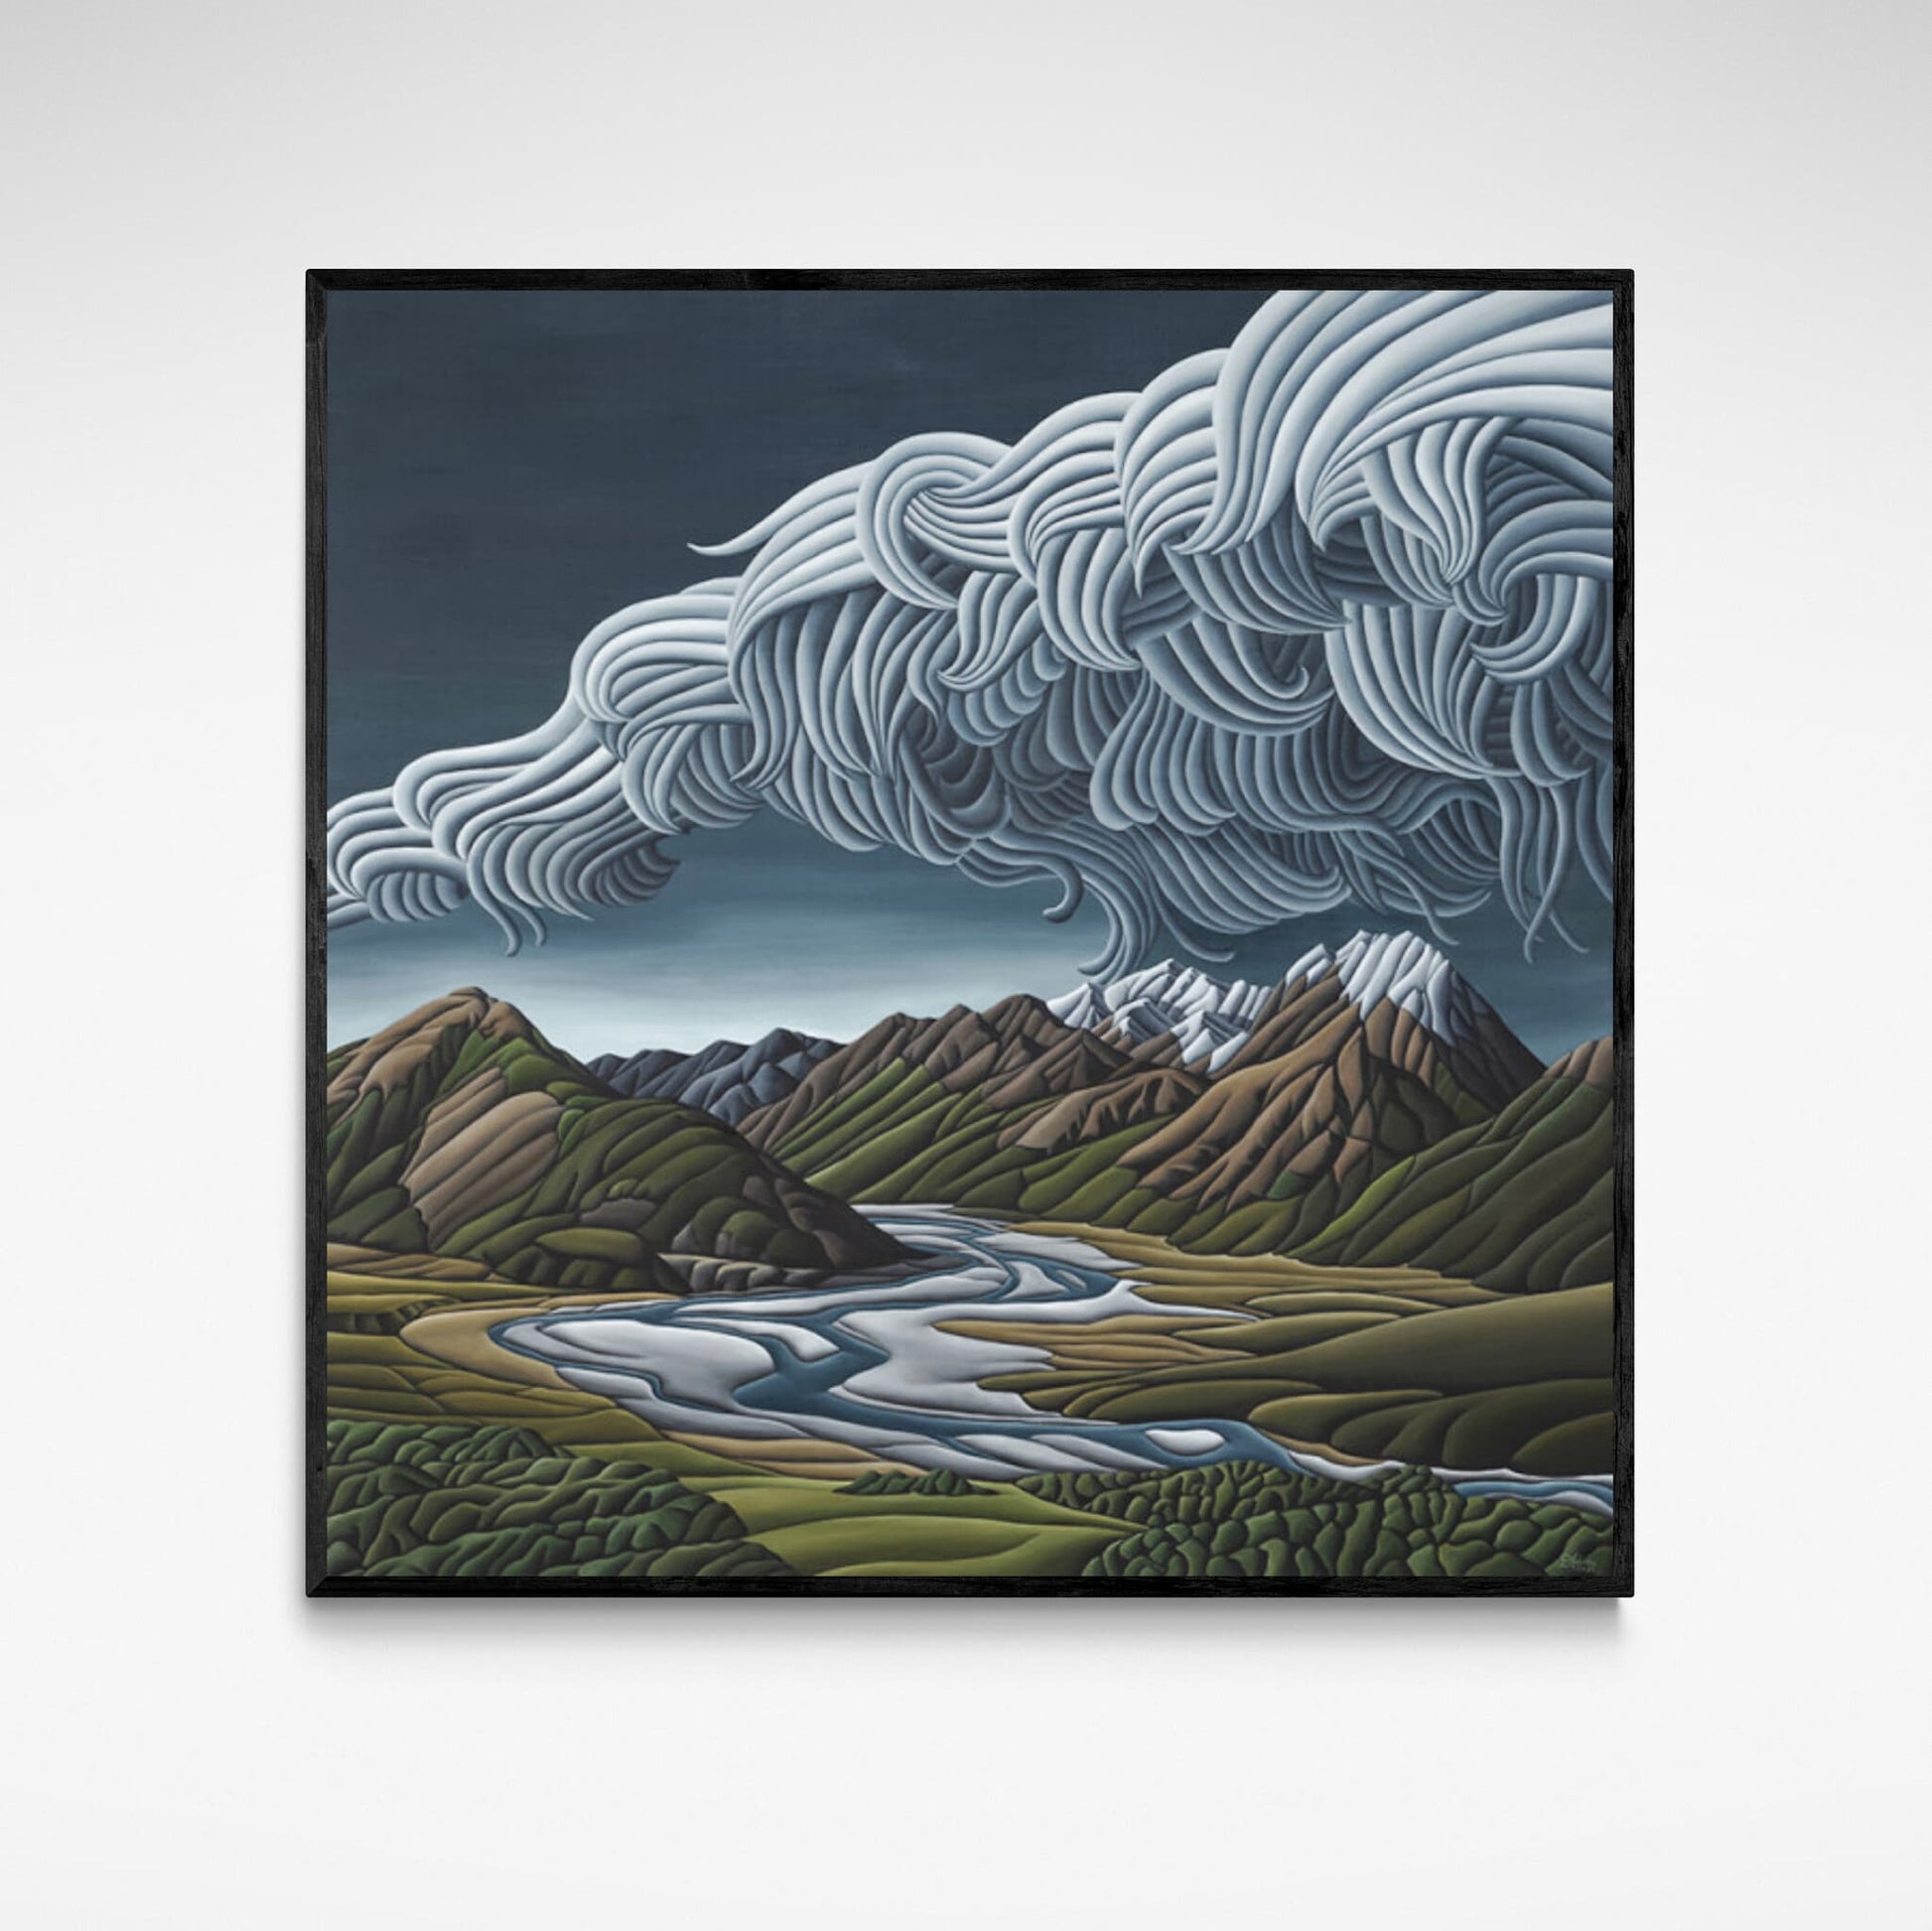 Framed Diana Adams print depicting storm clouds over mountains and river valley